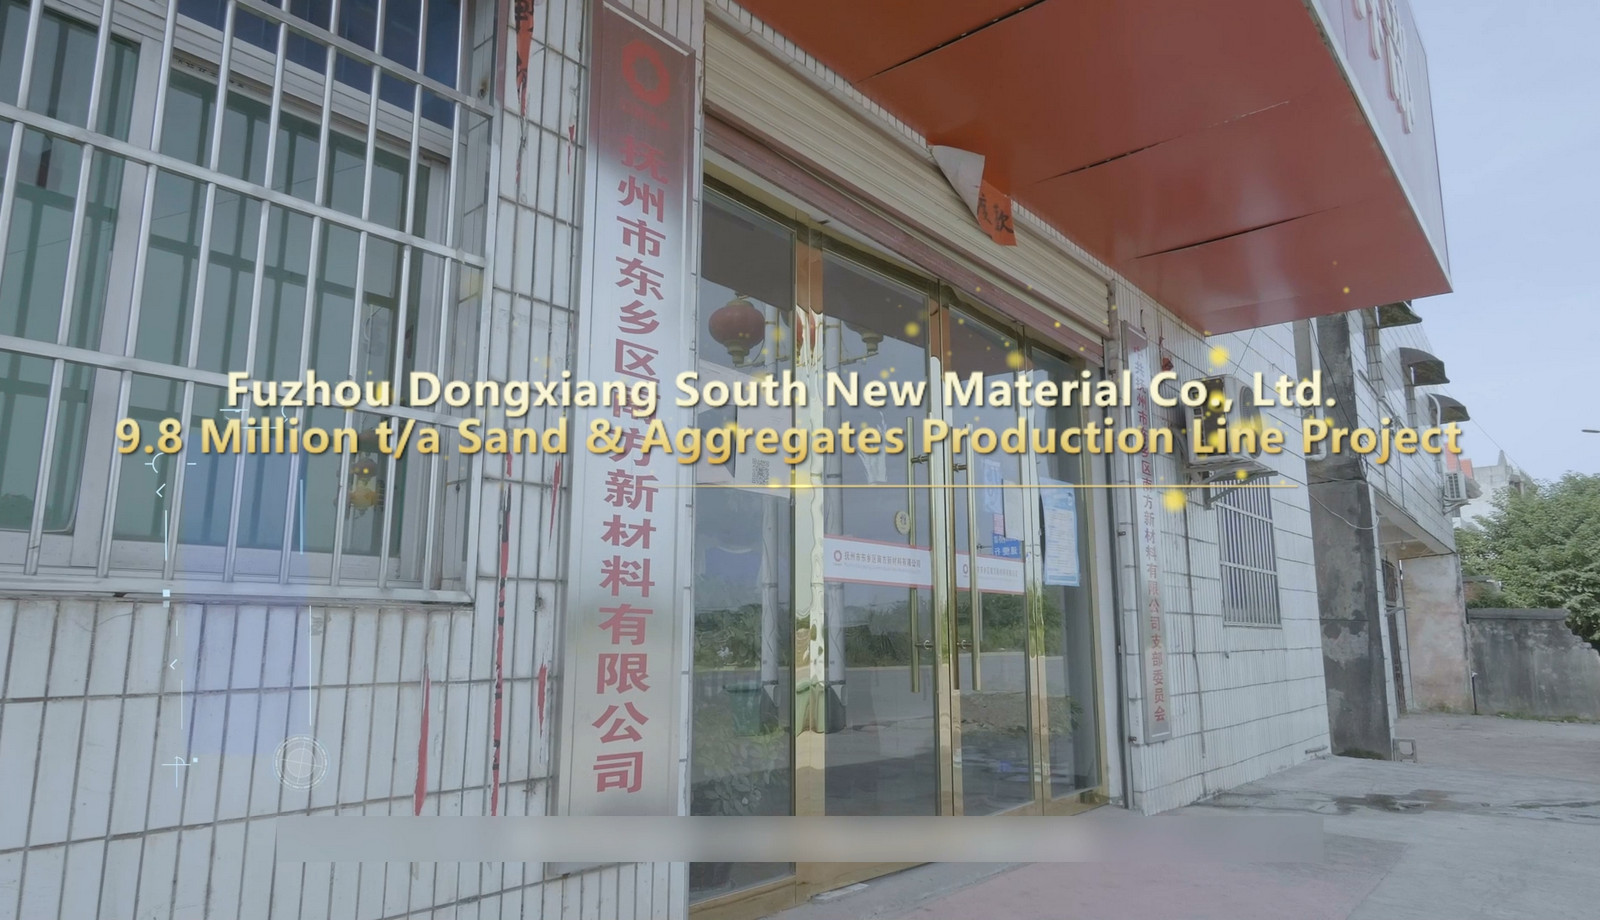 Fuzhou Dongxiang South New Material 9.8 Million t/a Sand & Aggregates Production Line Project